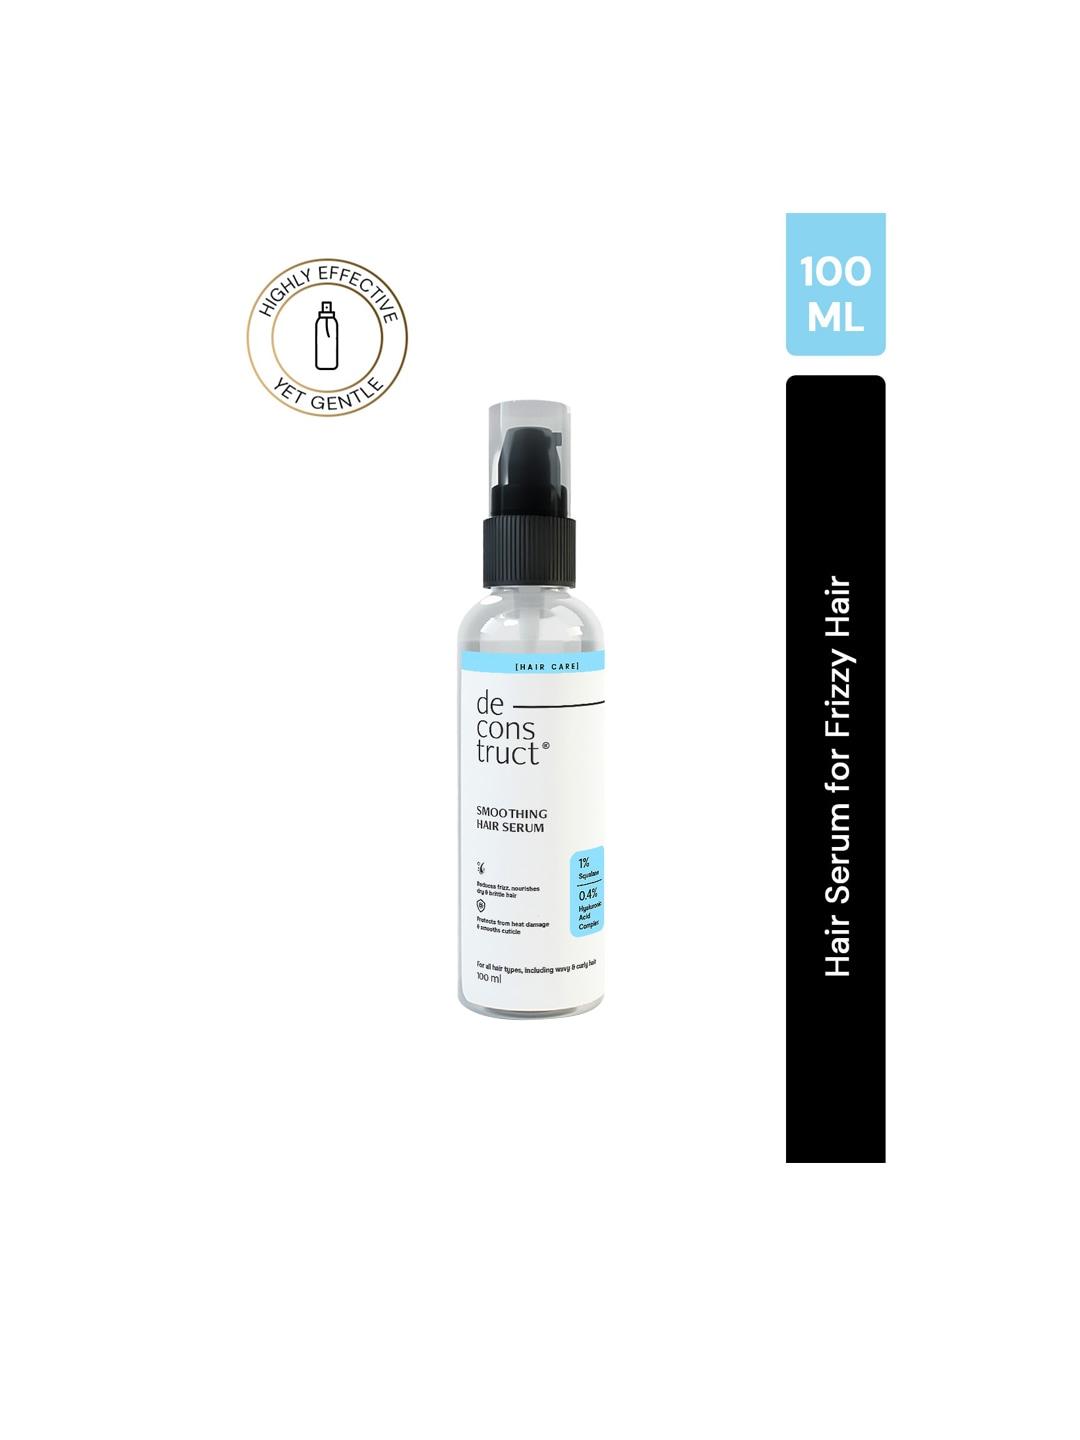 deconstruct 1% Squalane & 0.4% Hyaluronic Acid Complex Smoothing Hair Serum - 100ml